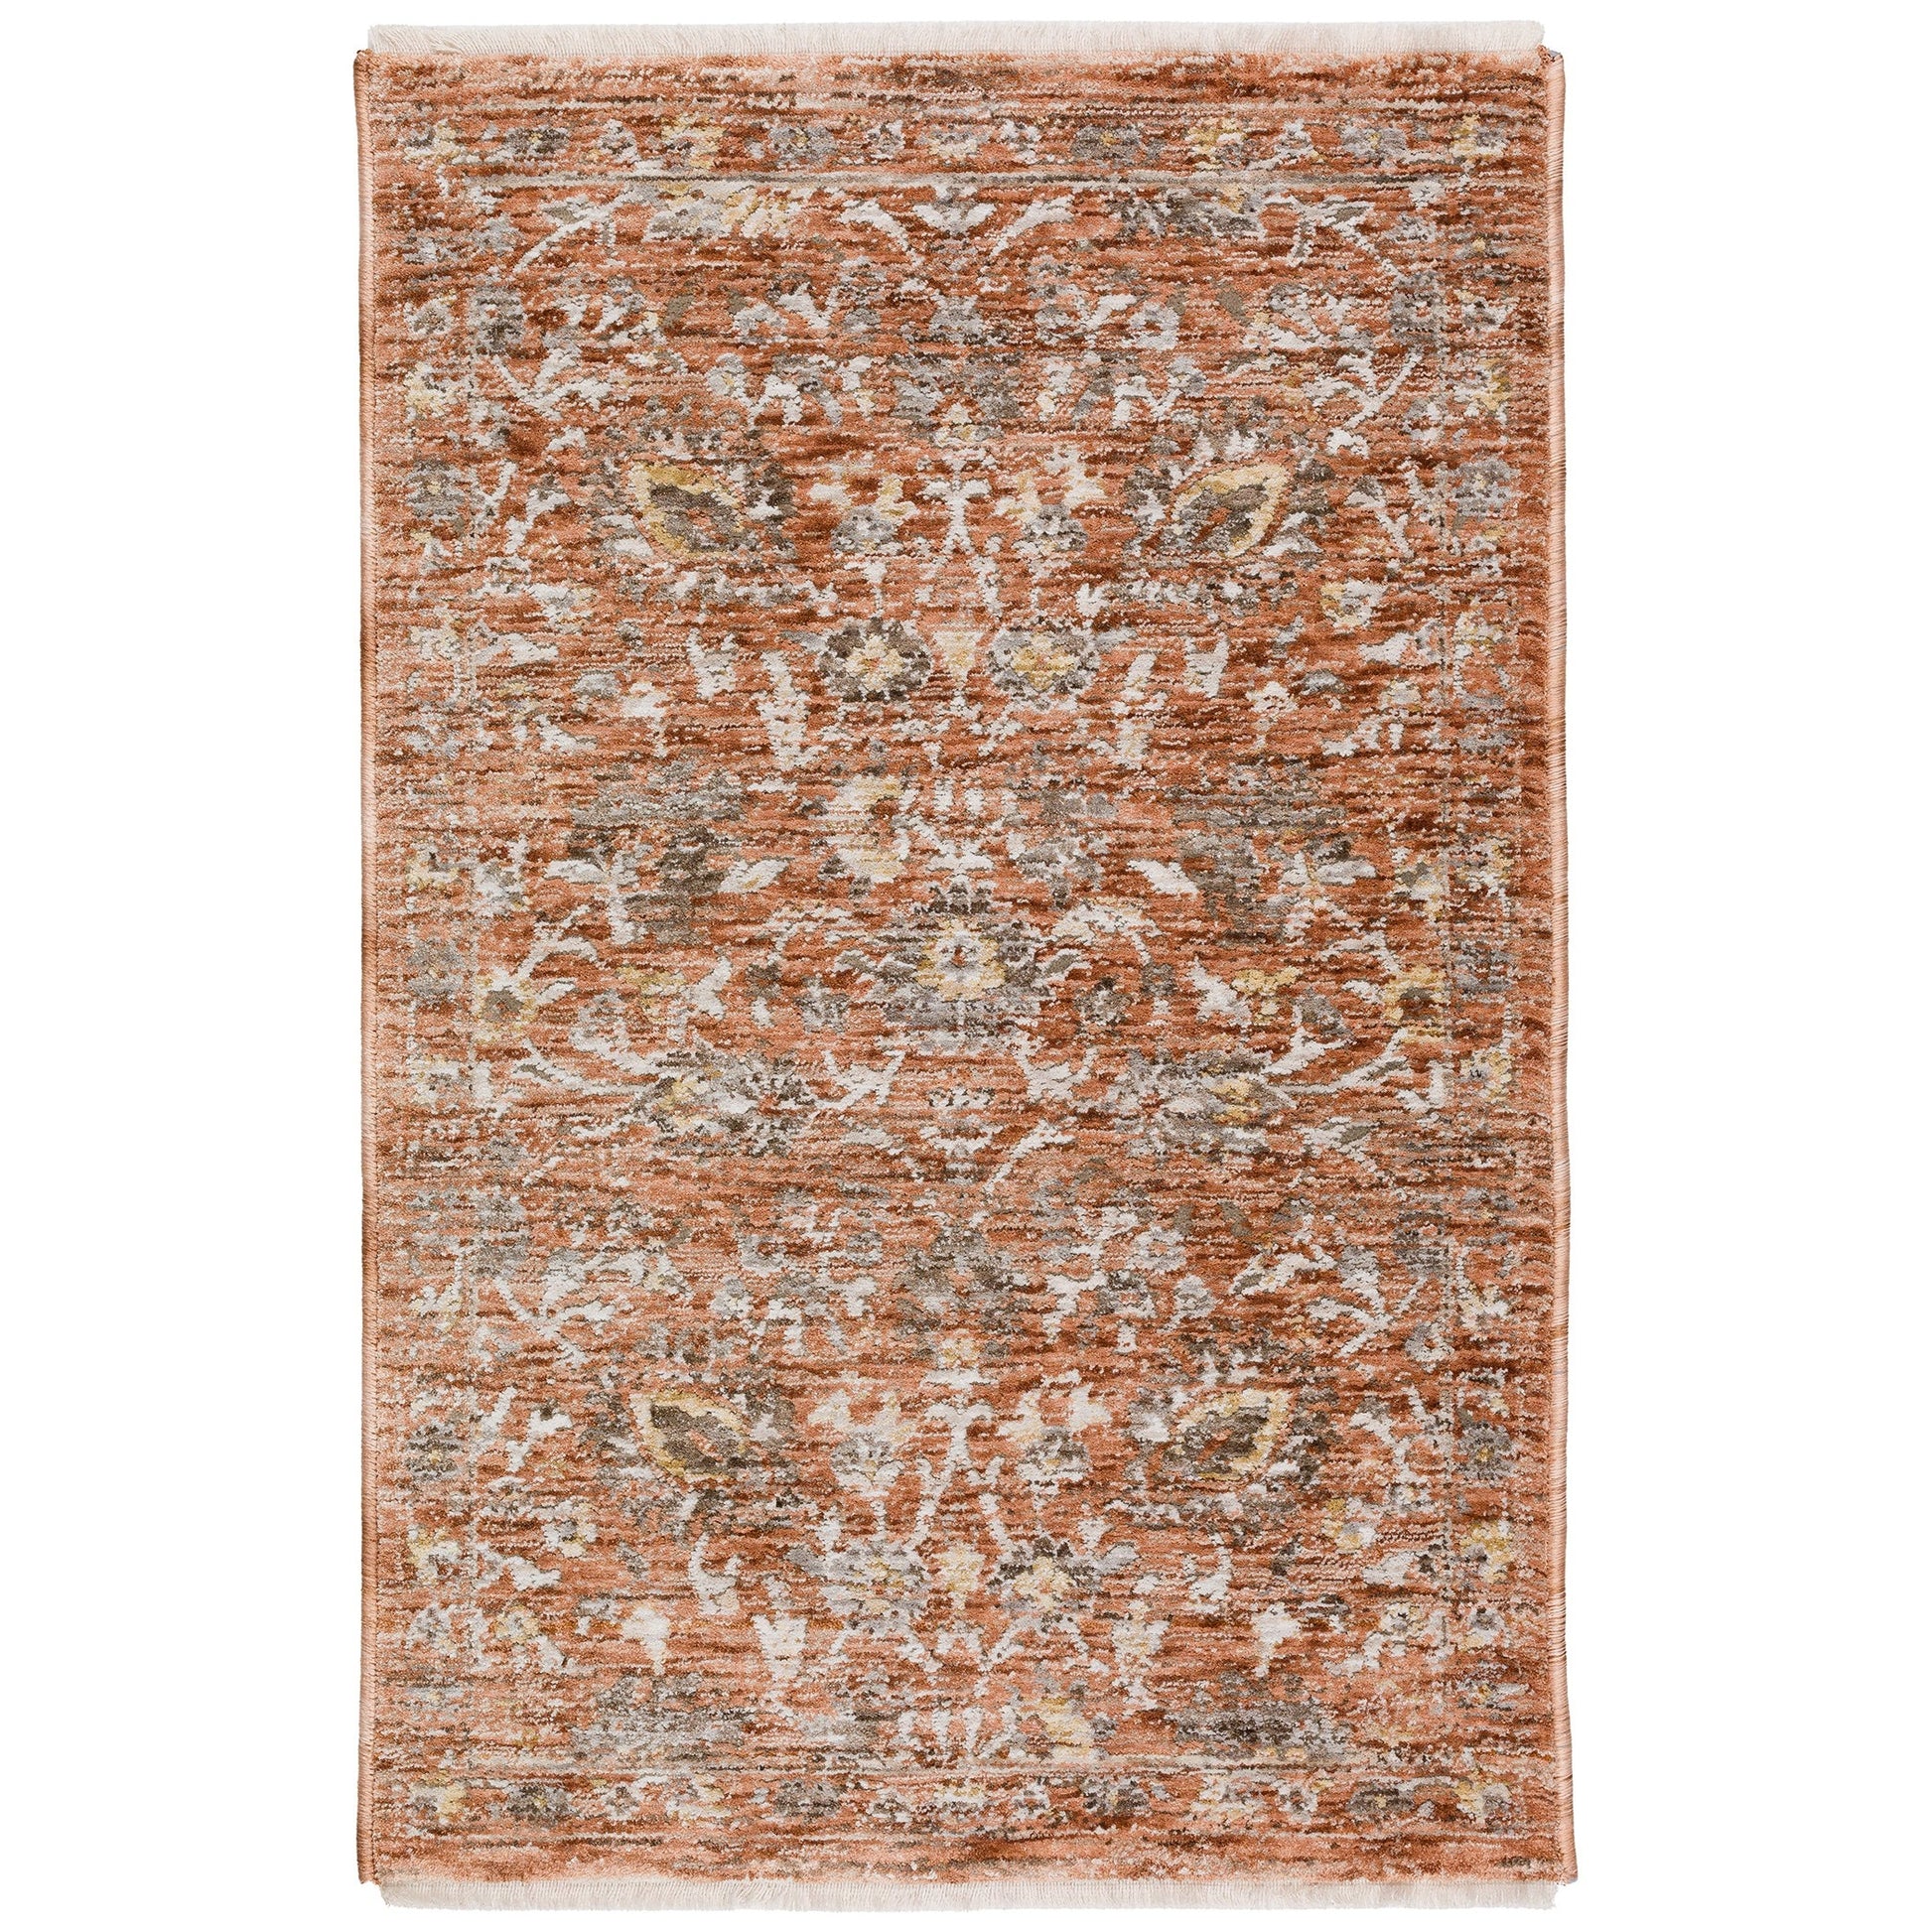 Dalyn Rugs Vienna VI9 Paprika Traditional Power Woven Rug